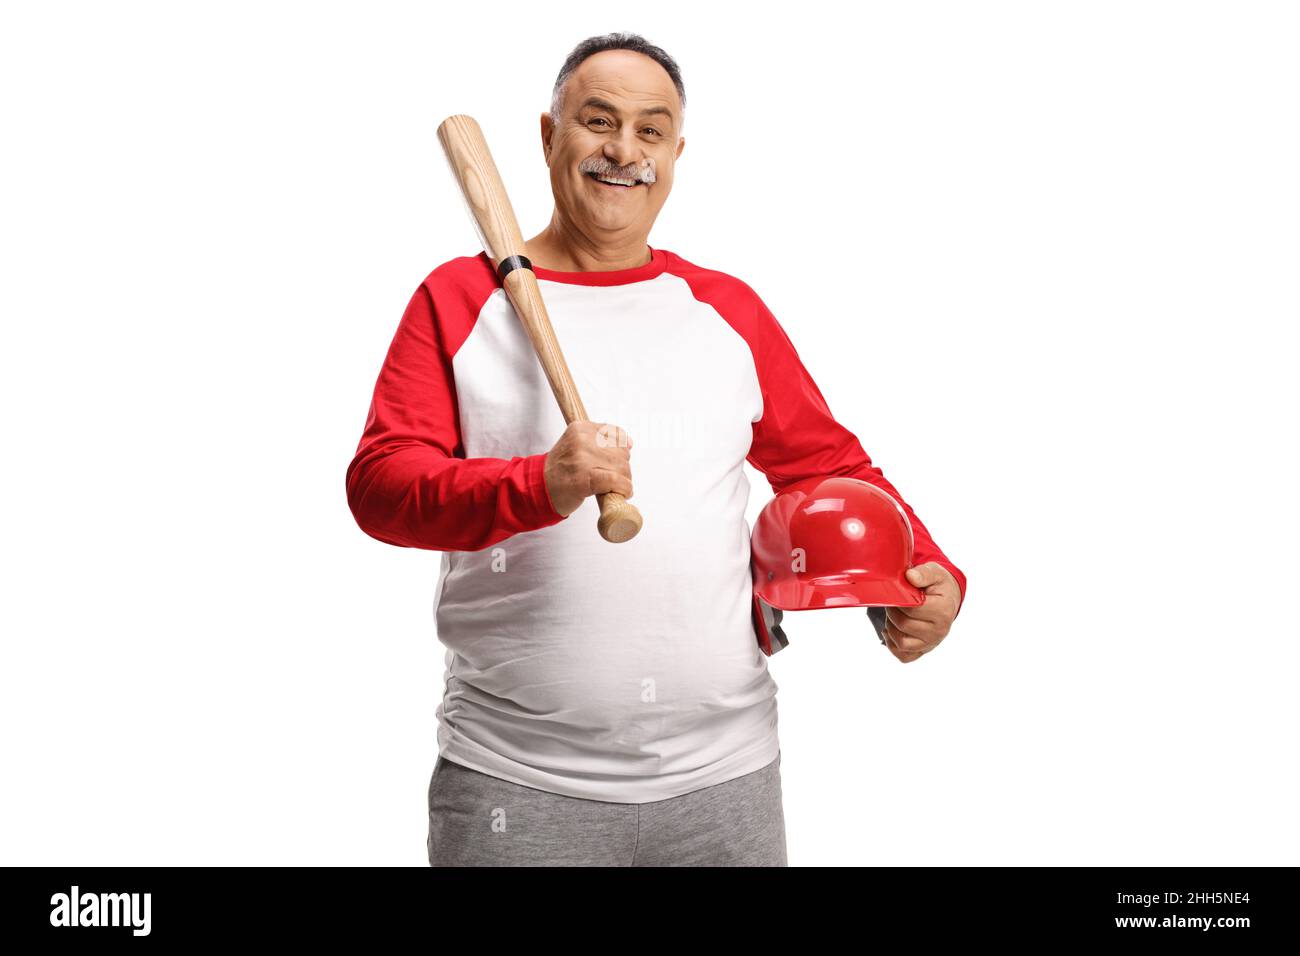 Mature man holding a baseball bat and a red helmet isolated on white background Stock Photo